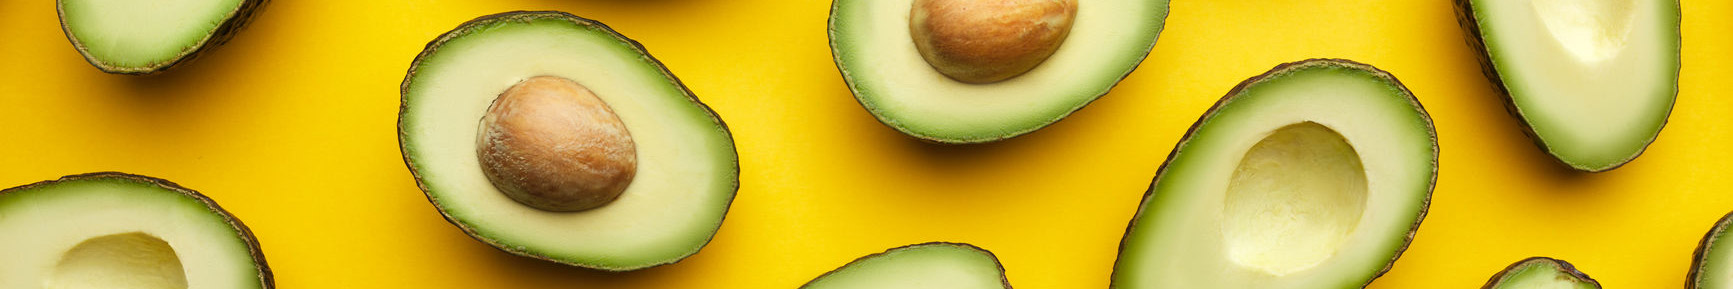 Avocados against a yellow background